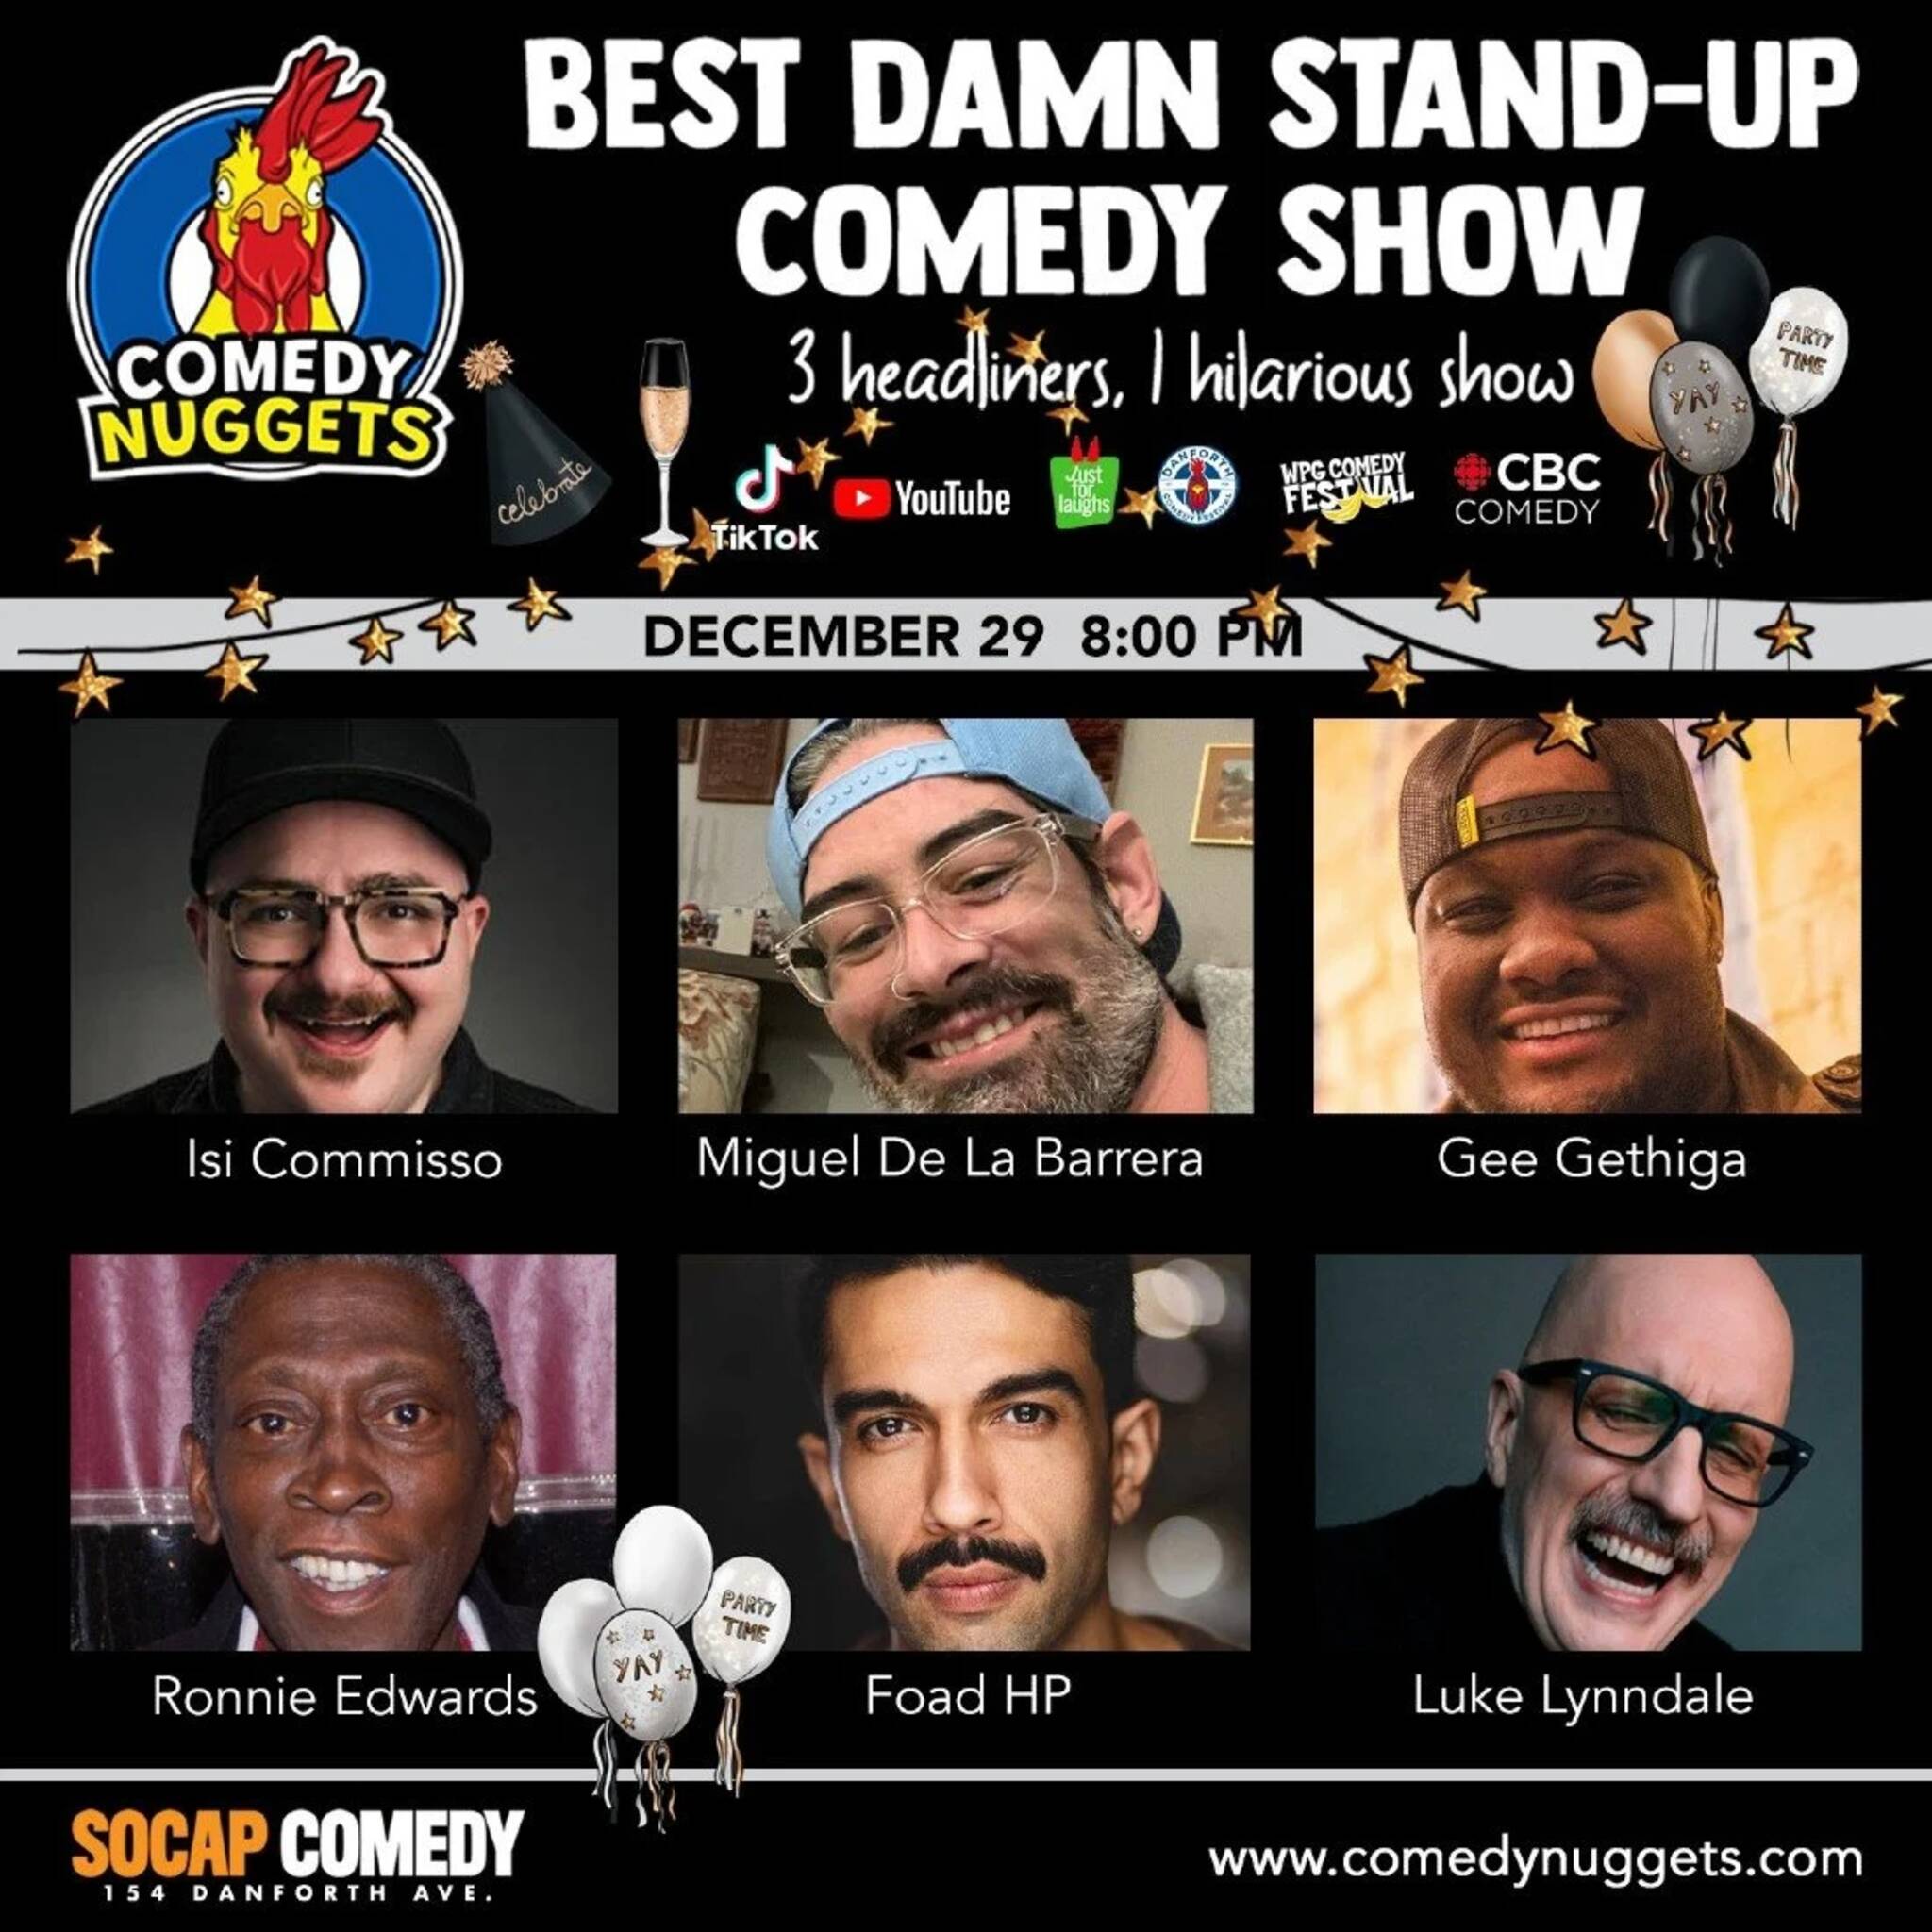 Best Damn StandUp Comedy Show New Years Eve Weekend Edition